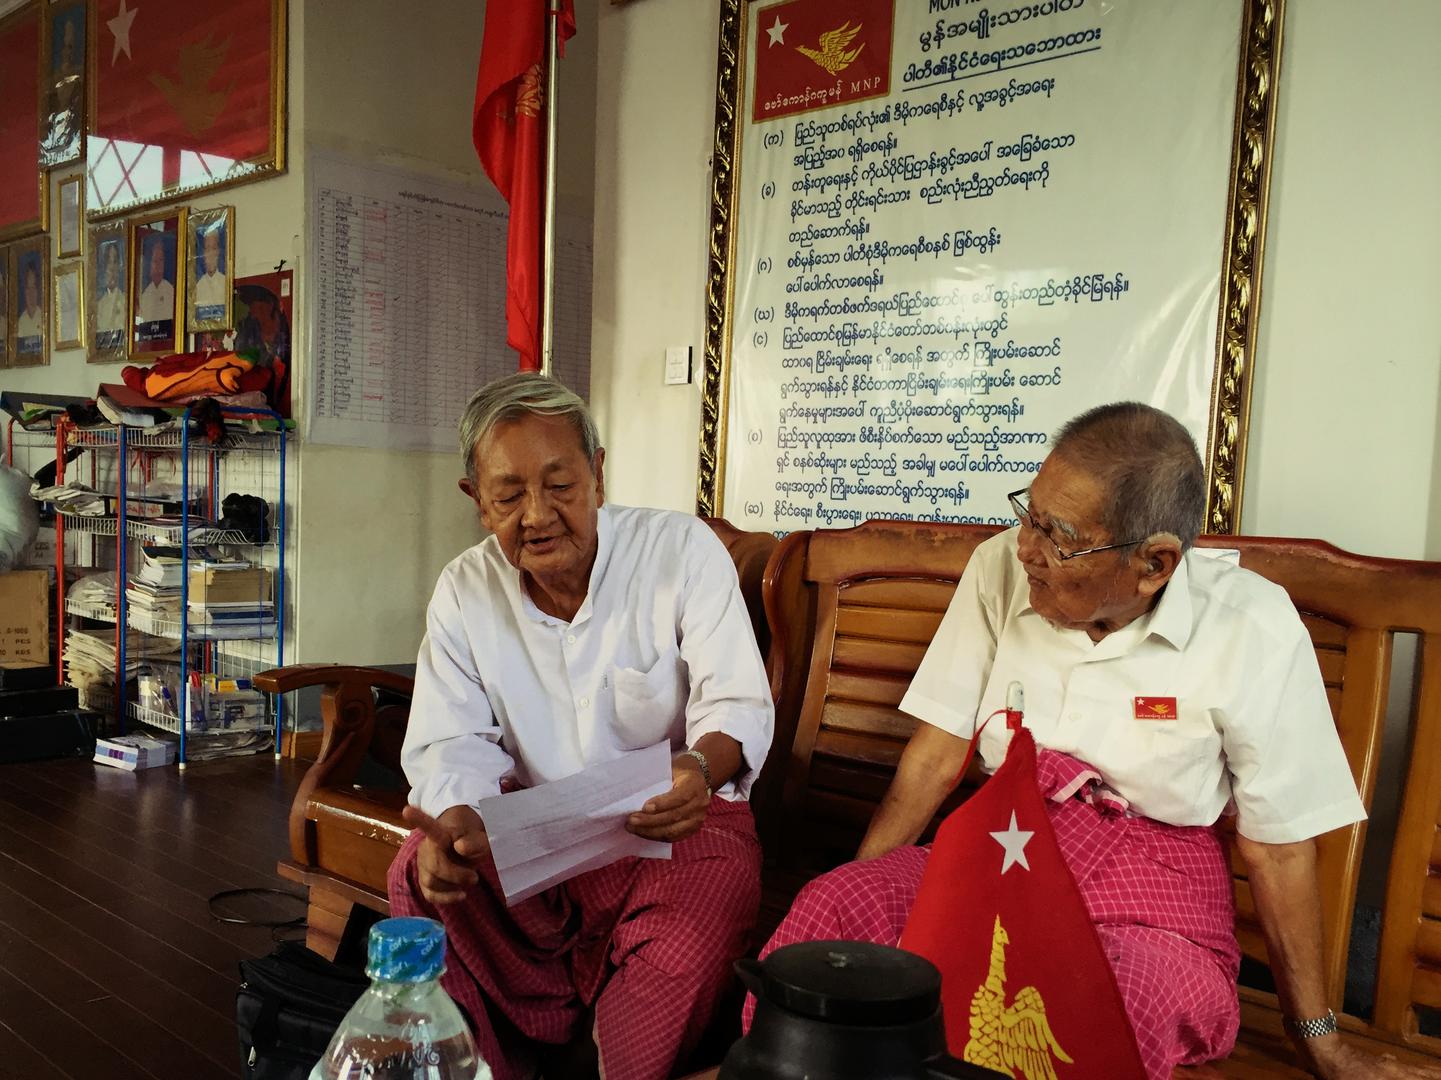 Naing Ngwe Theim and Naing Ngwe Thein, the chair and vice-chair of the Mon National Party, read the party political policies. 